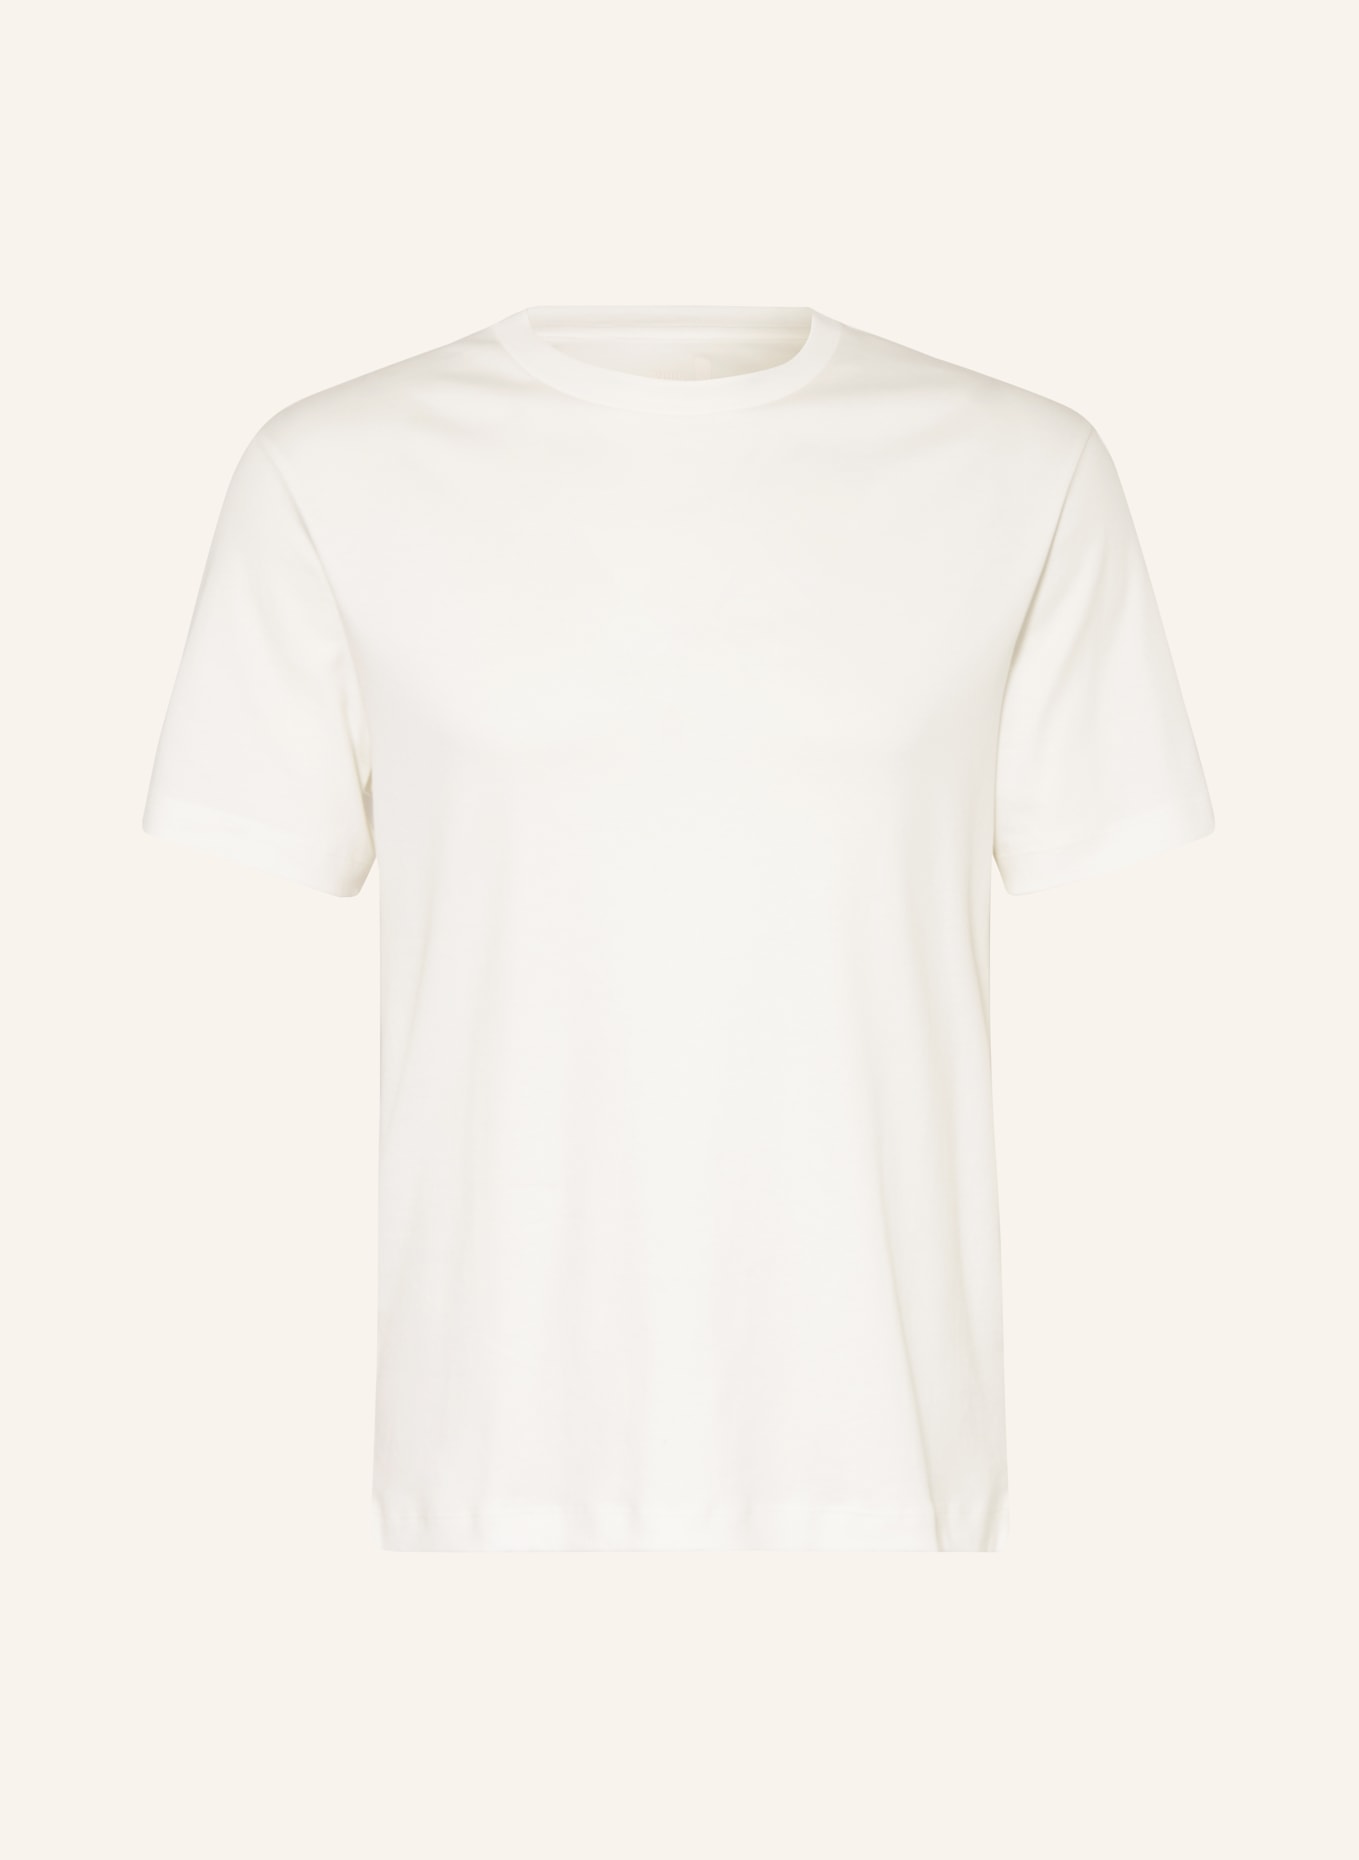 CG - CLUB of GENTS T-shirt, Color: WHITE (Image 1)